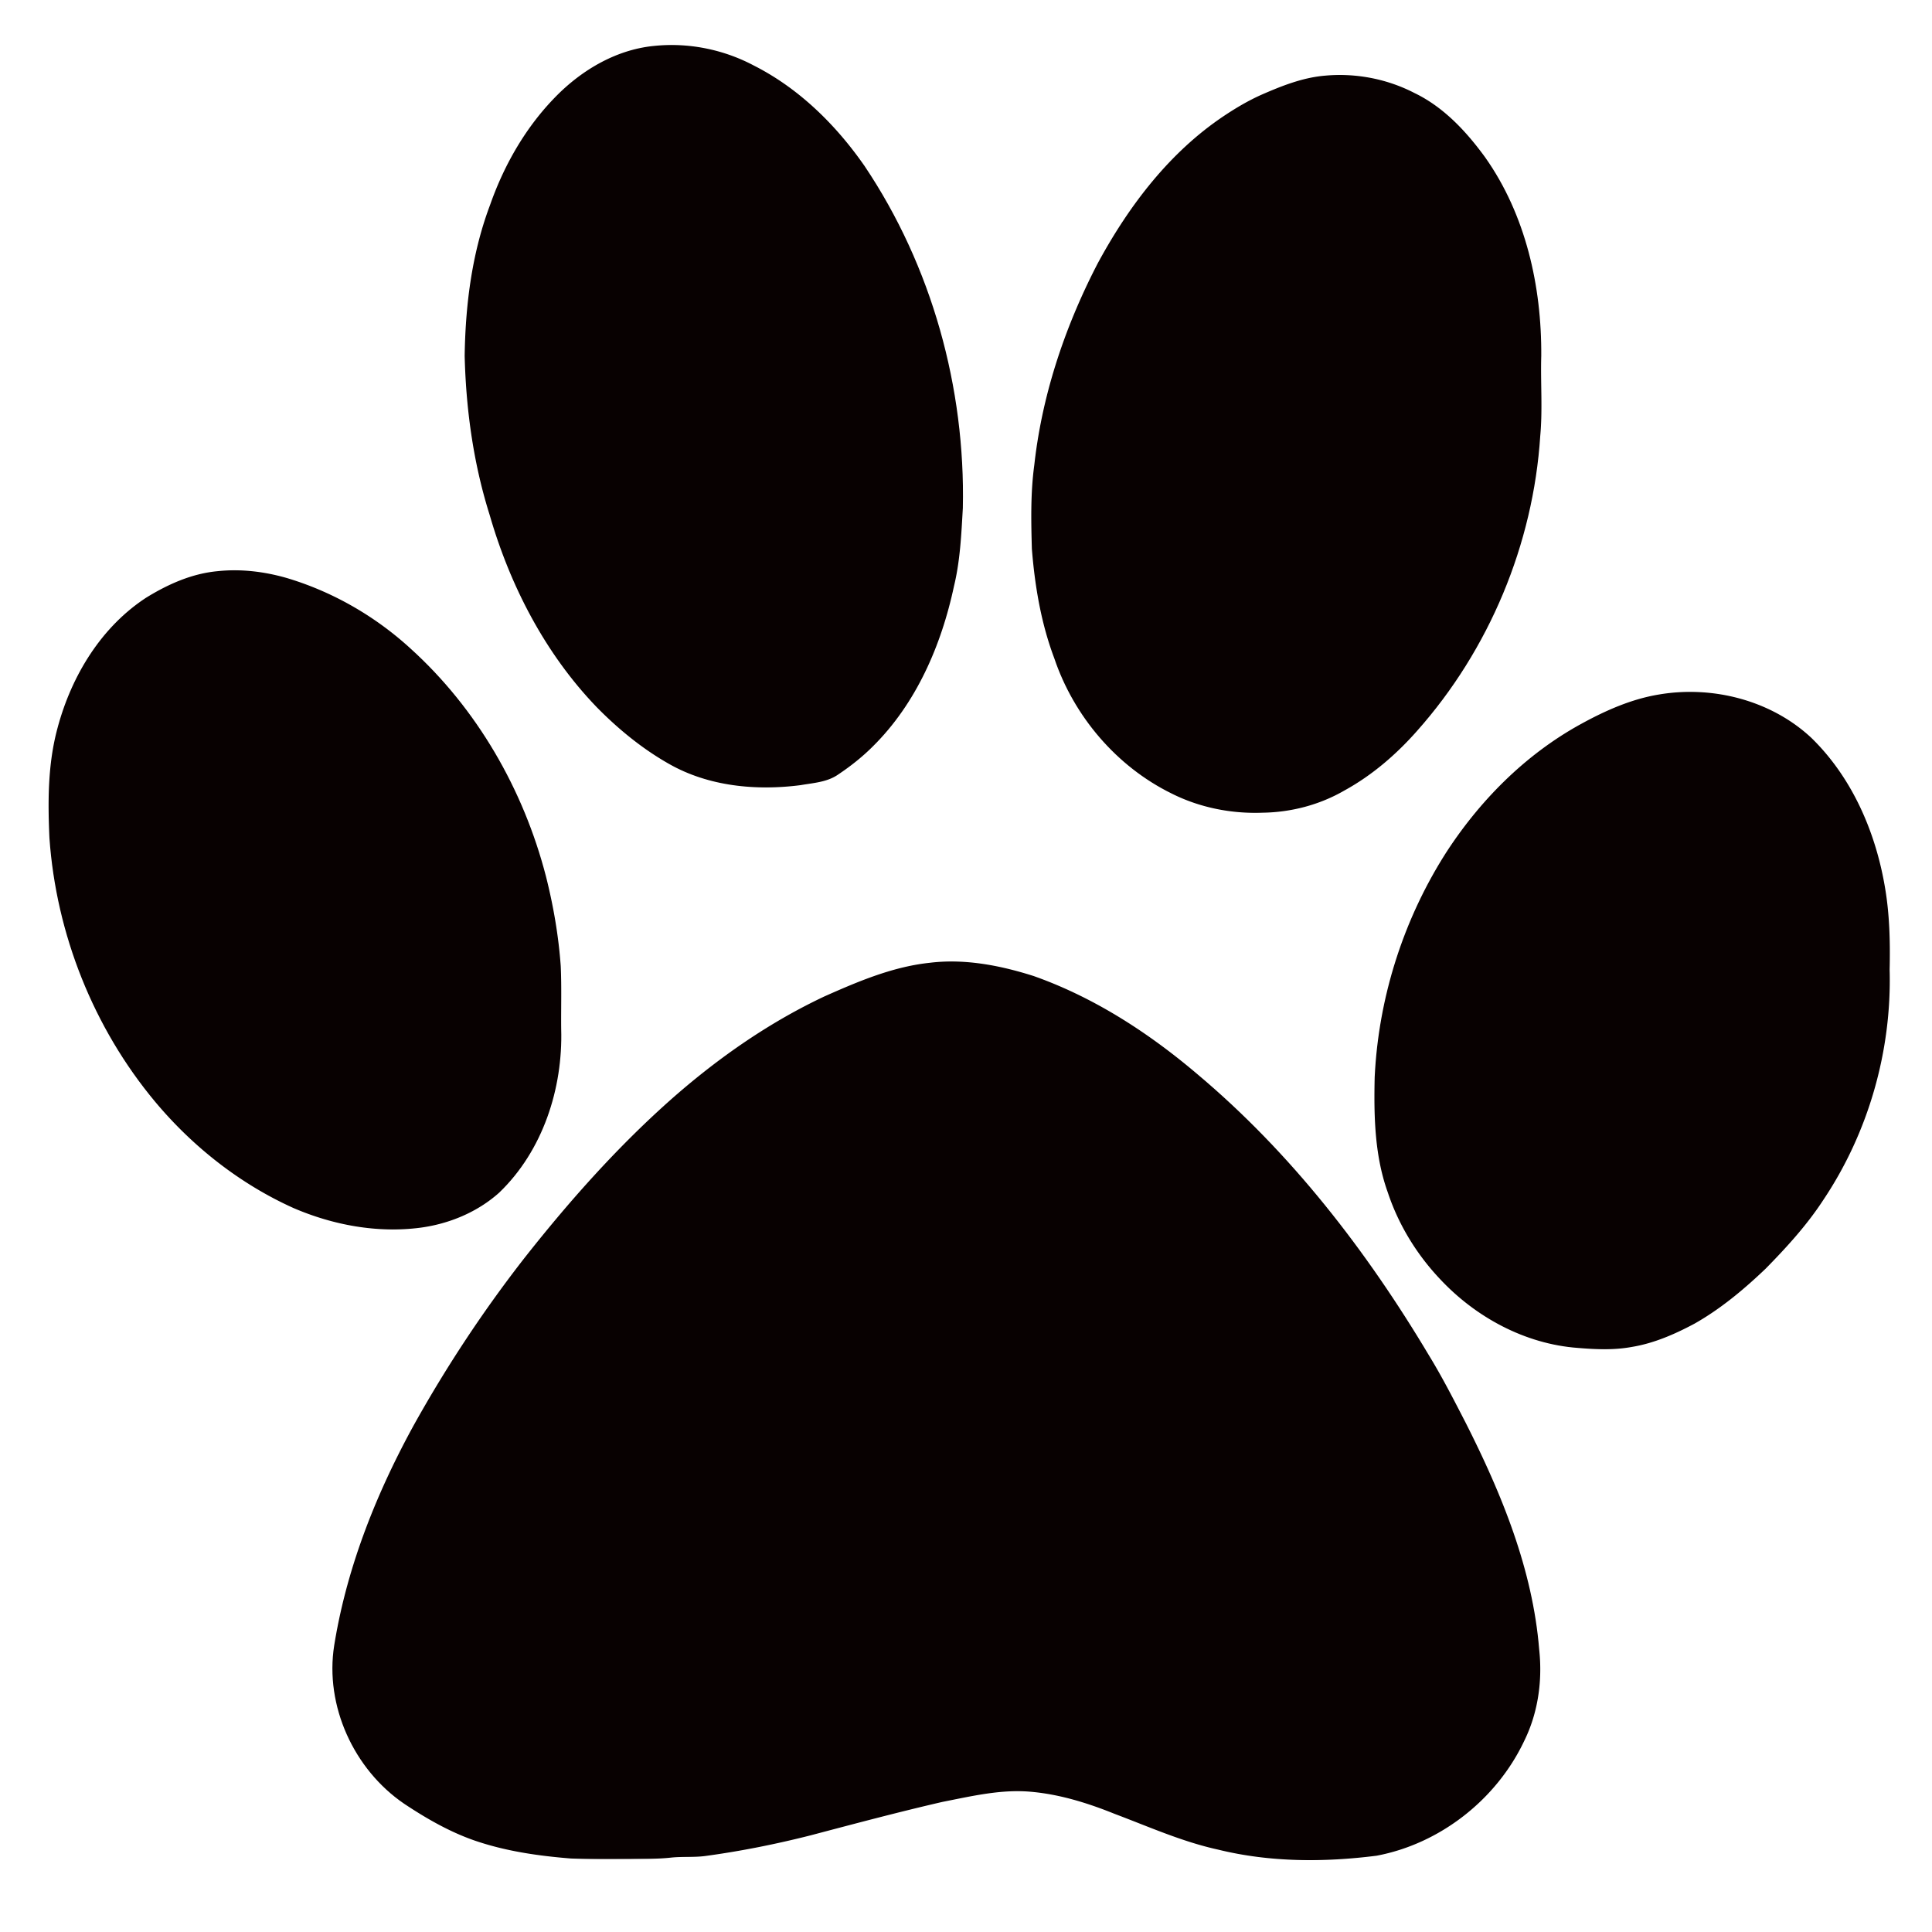 Paw print wildcats on dog paws paw tattoos and clip art image